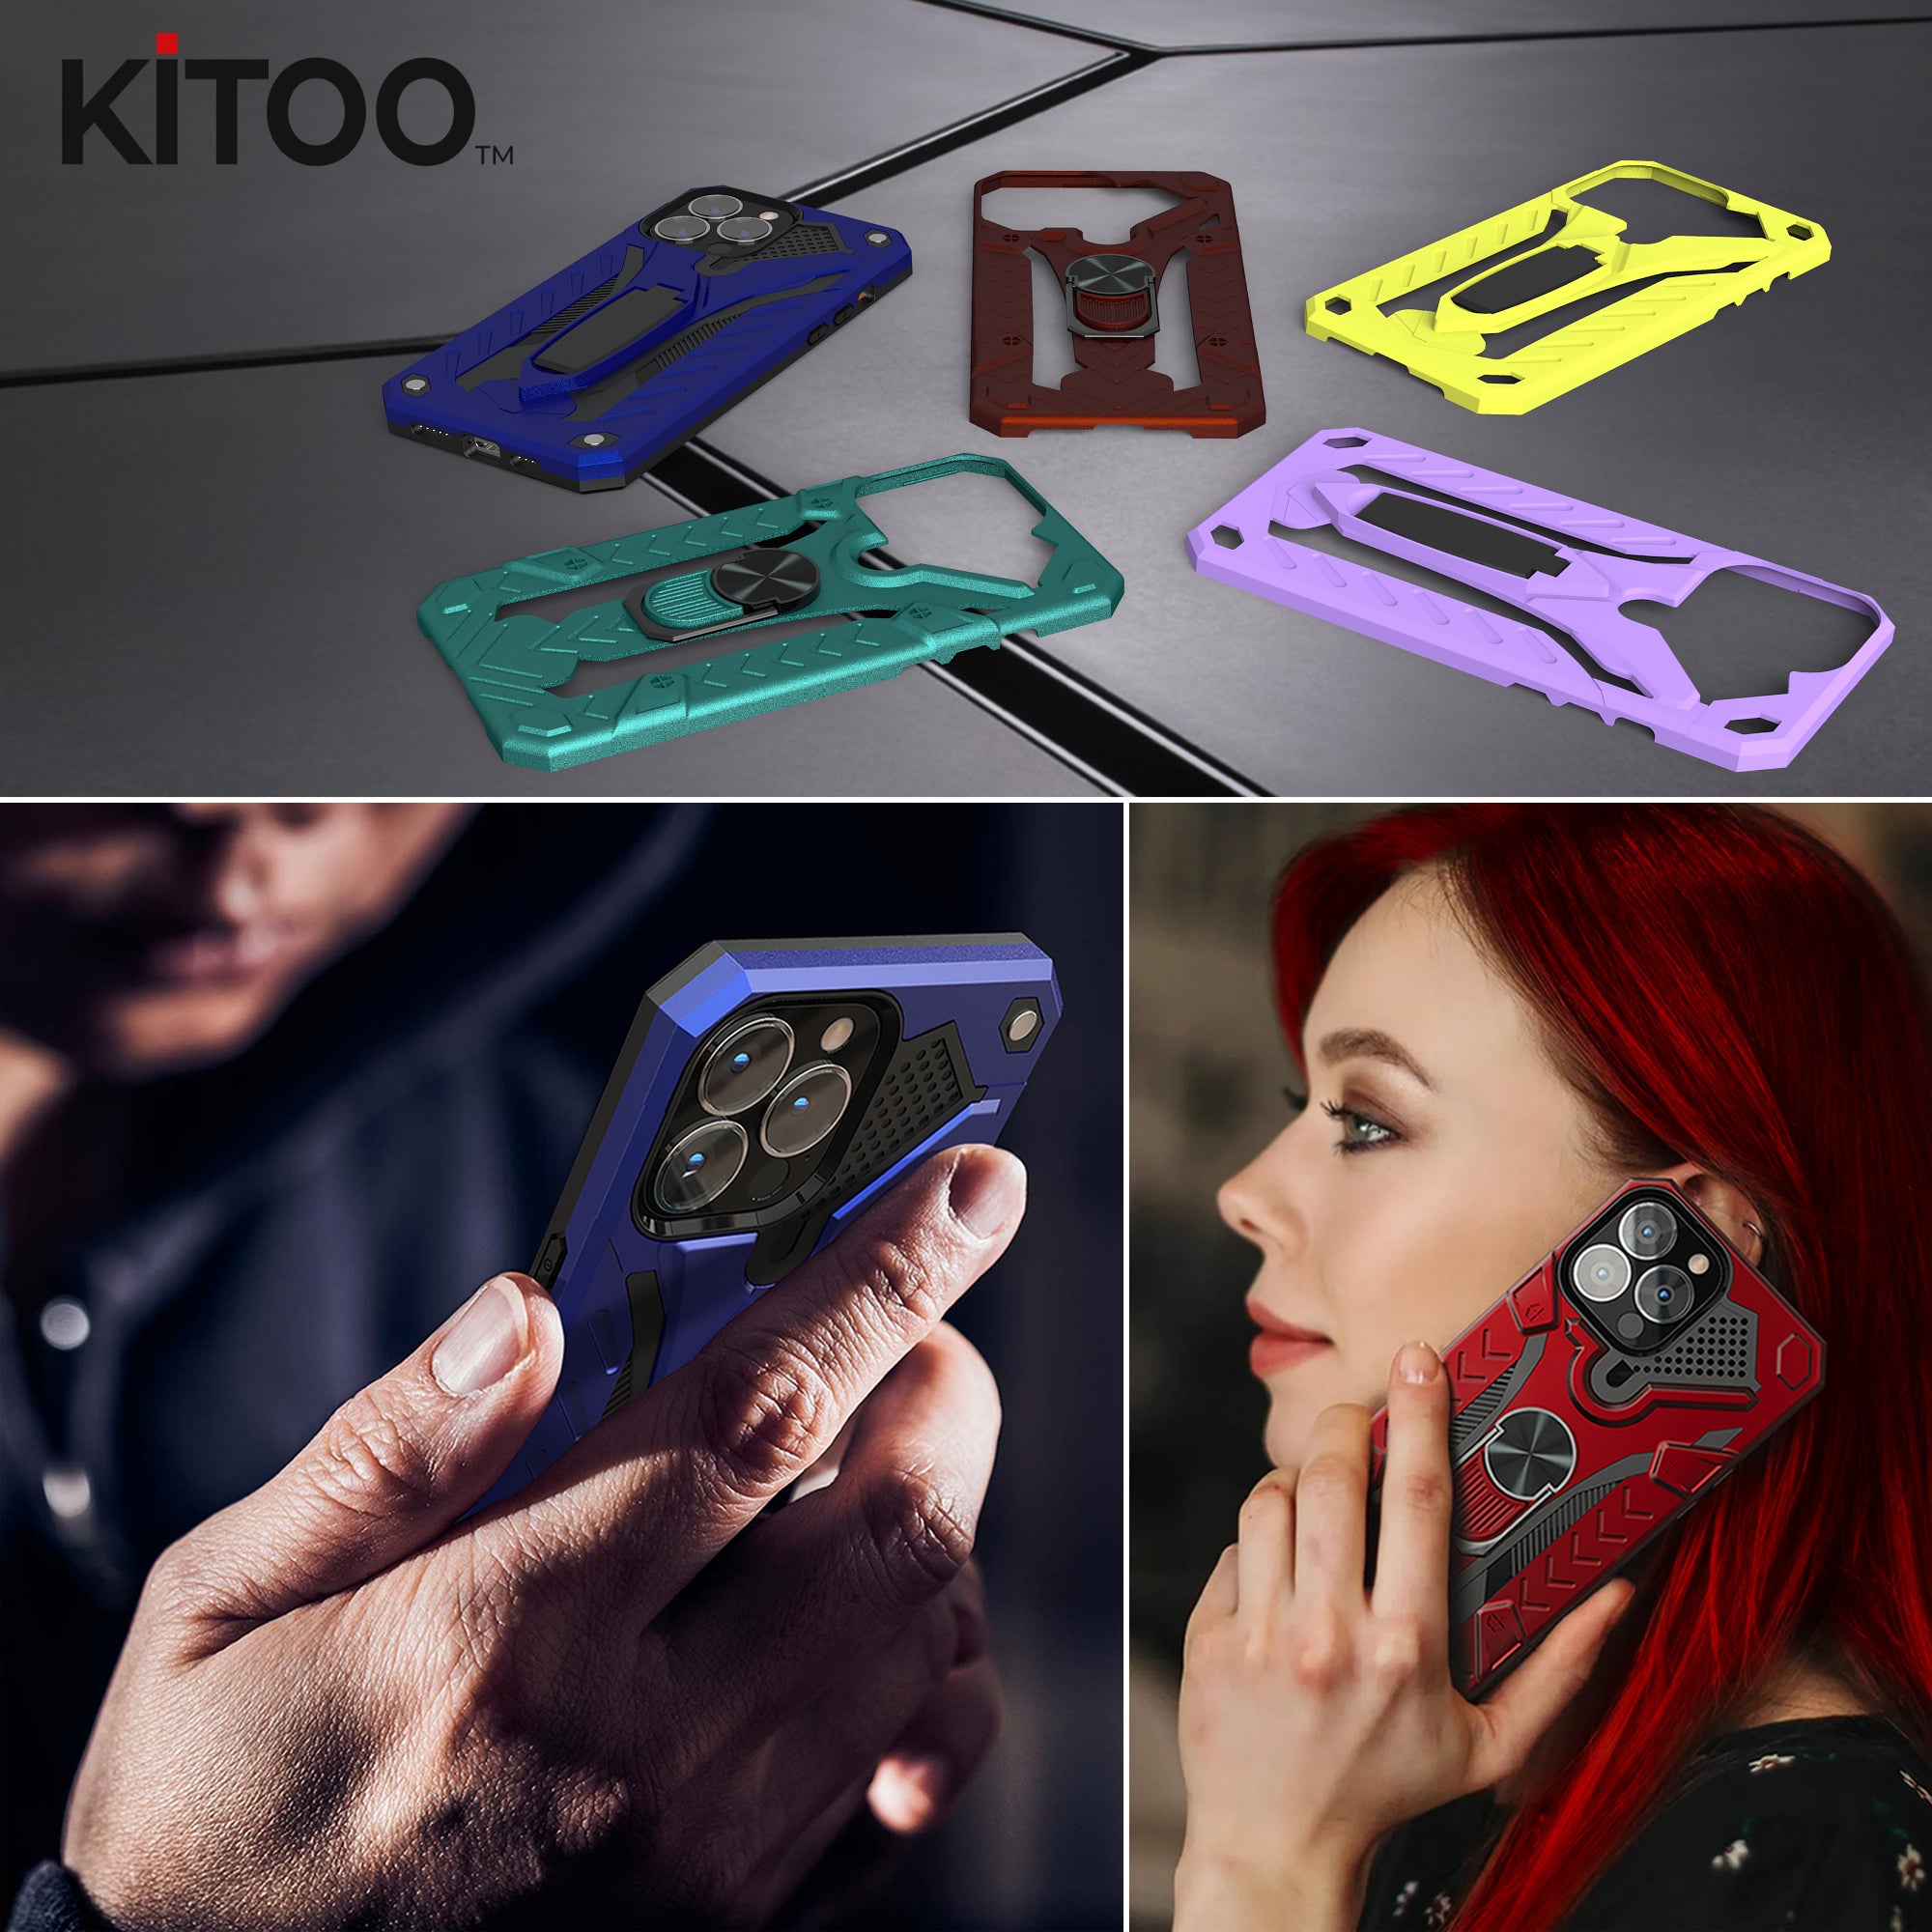 Kitoo Ring Panel Designed for iPhone 13 Mini case (Spare Part only) - Blue